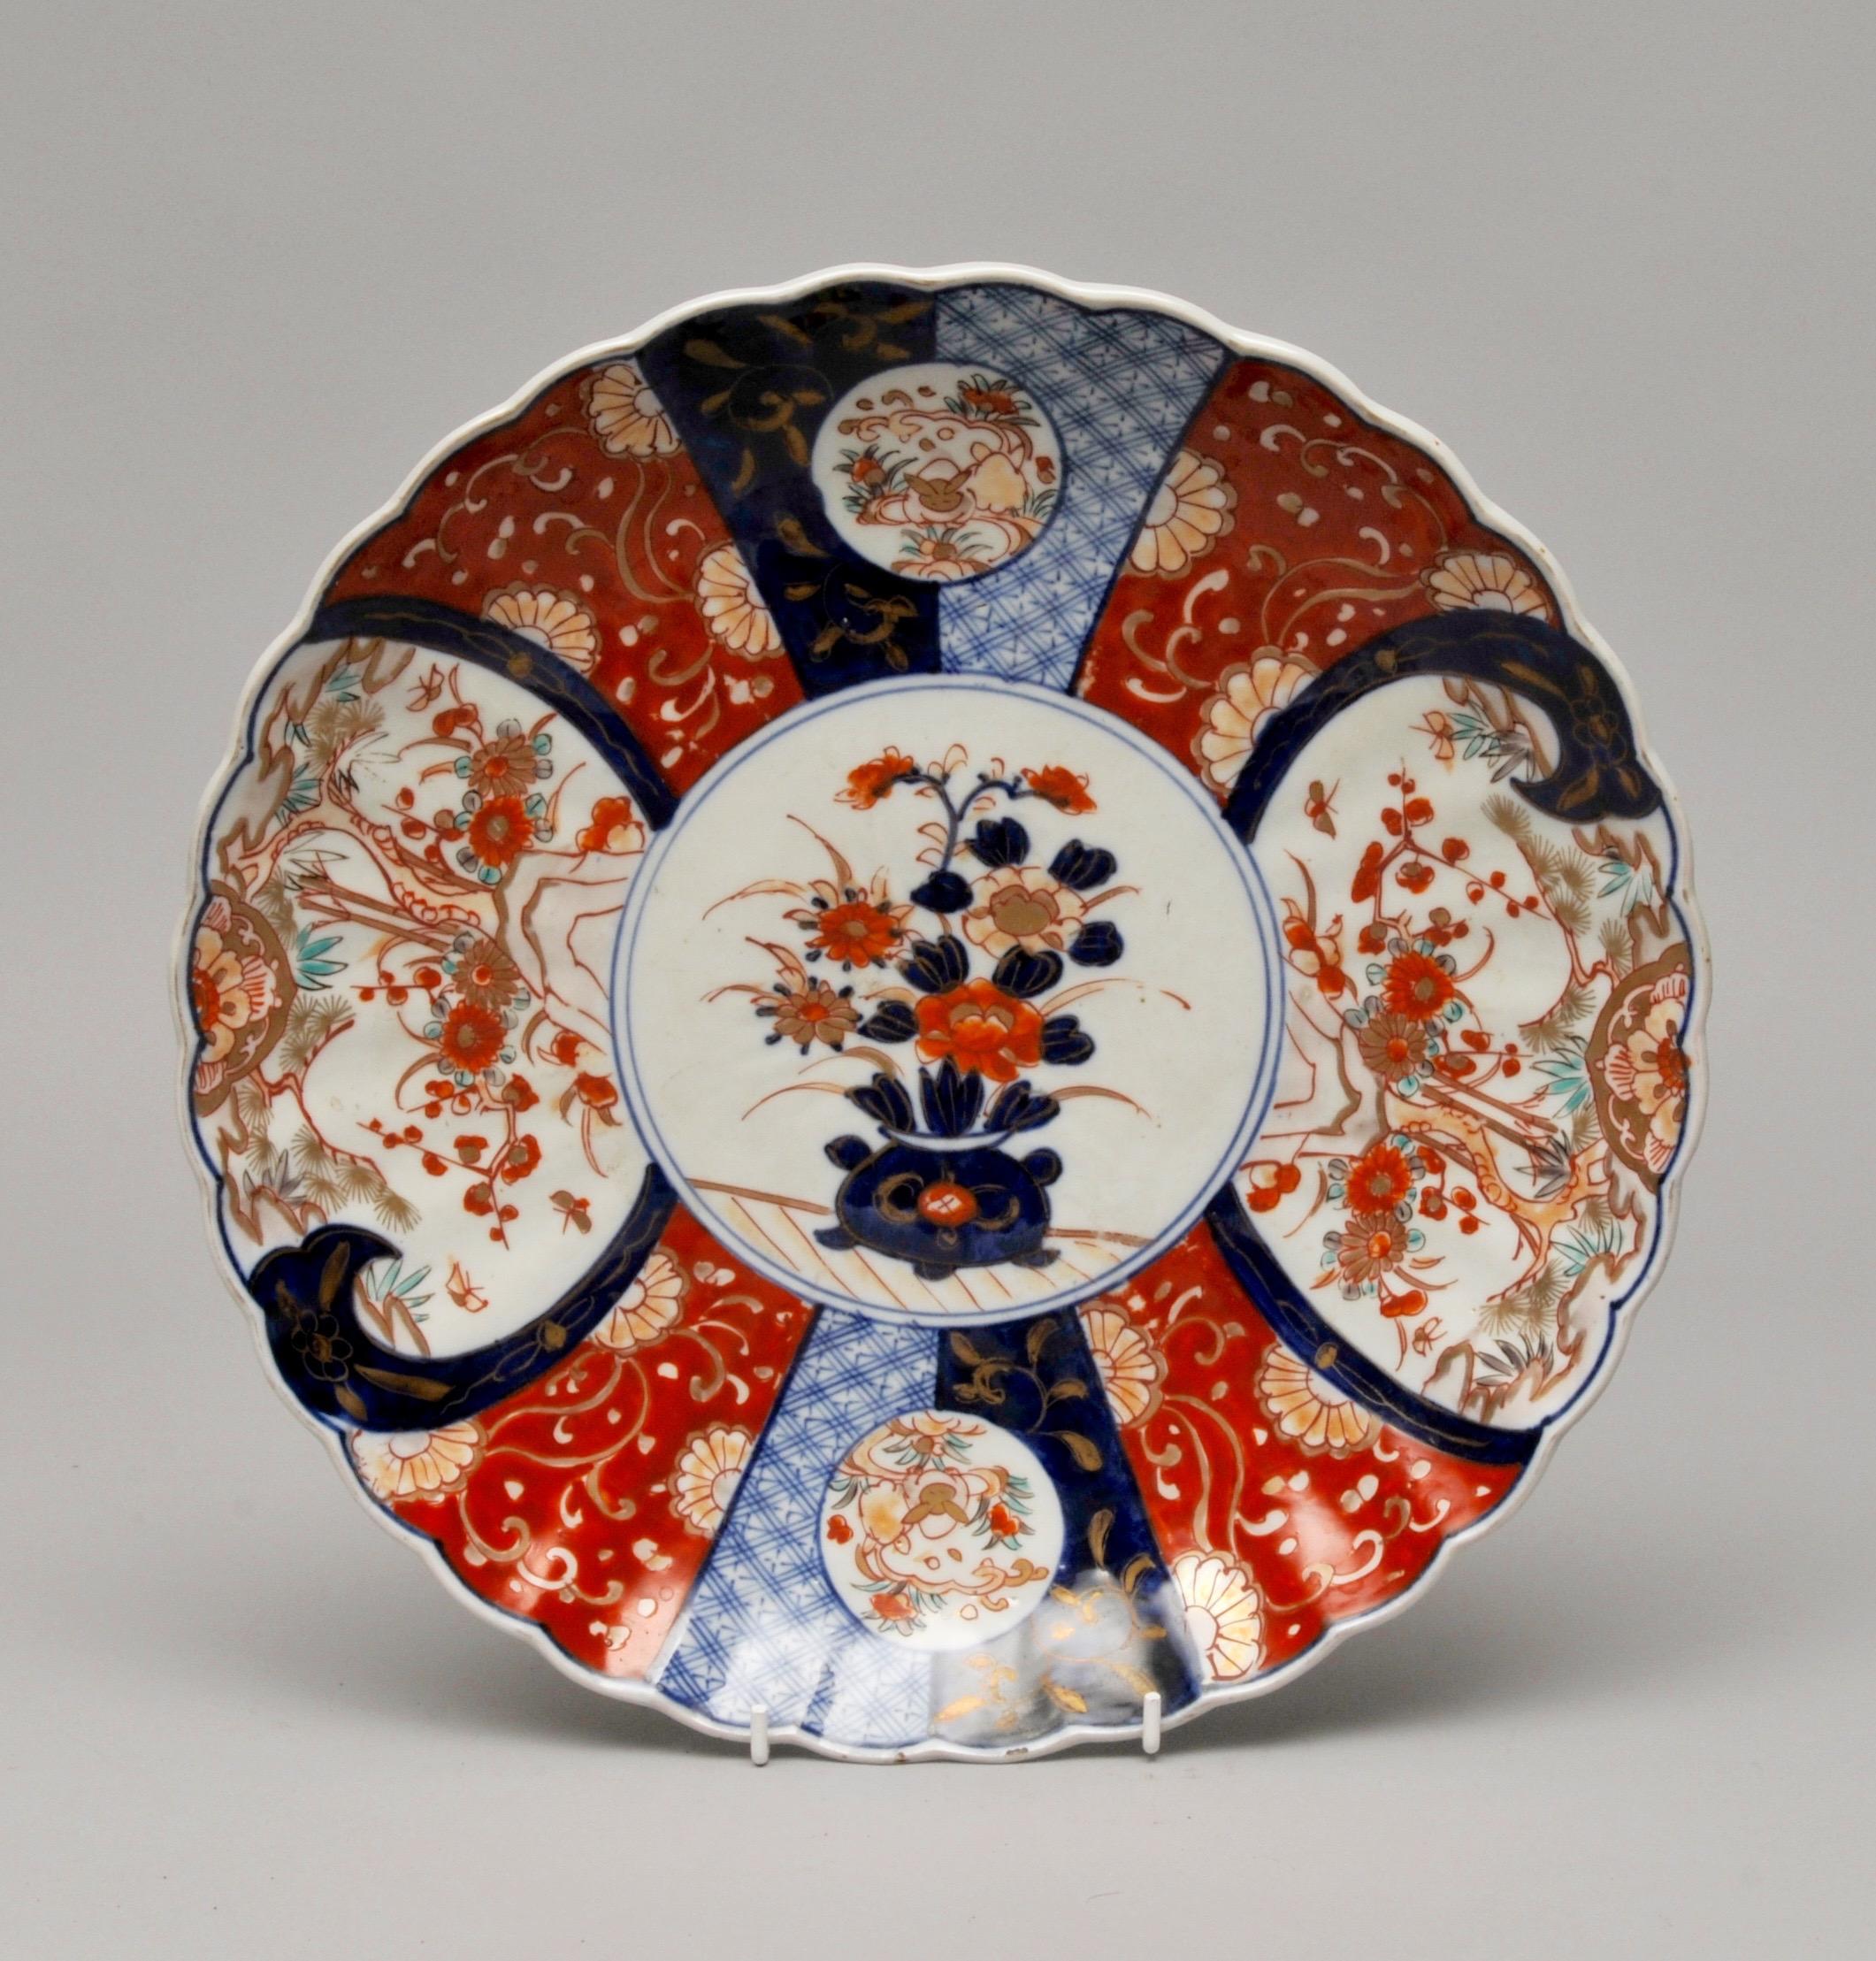 Japanese Imari charger plate, circa 1900

Measure: D 30cm

Imari porcelain is the name for Japanese porcelain wares made in the town of Arita, in the former Hizen Province, northwestern Kyushu. They were exported to Europe extensively from the